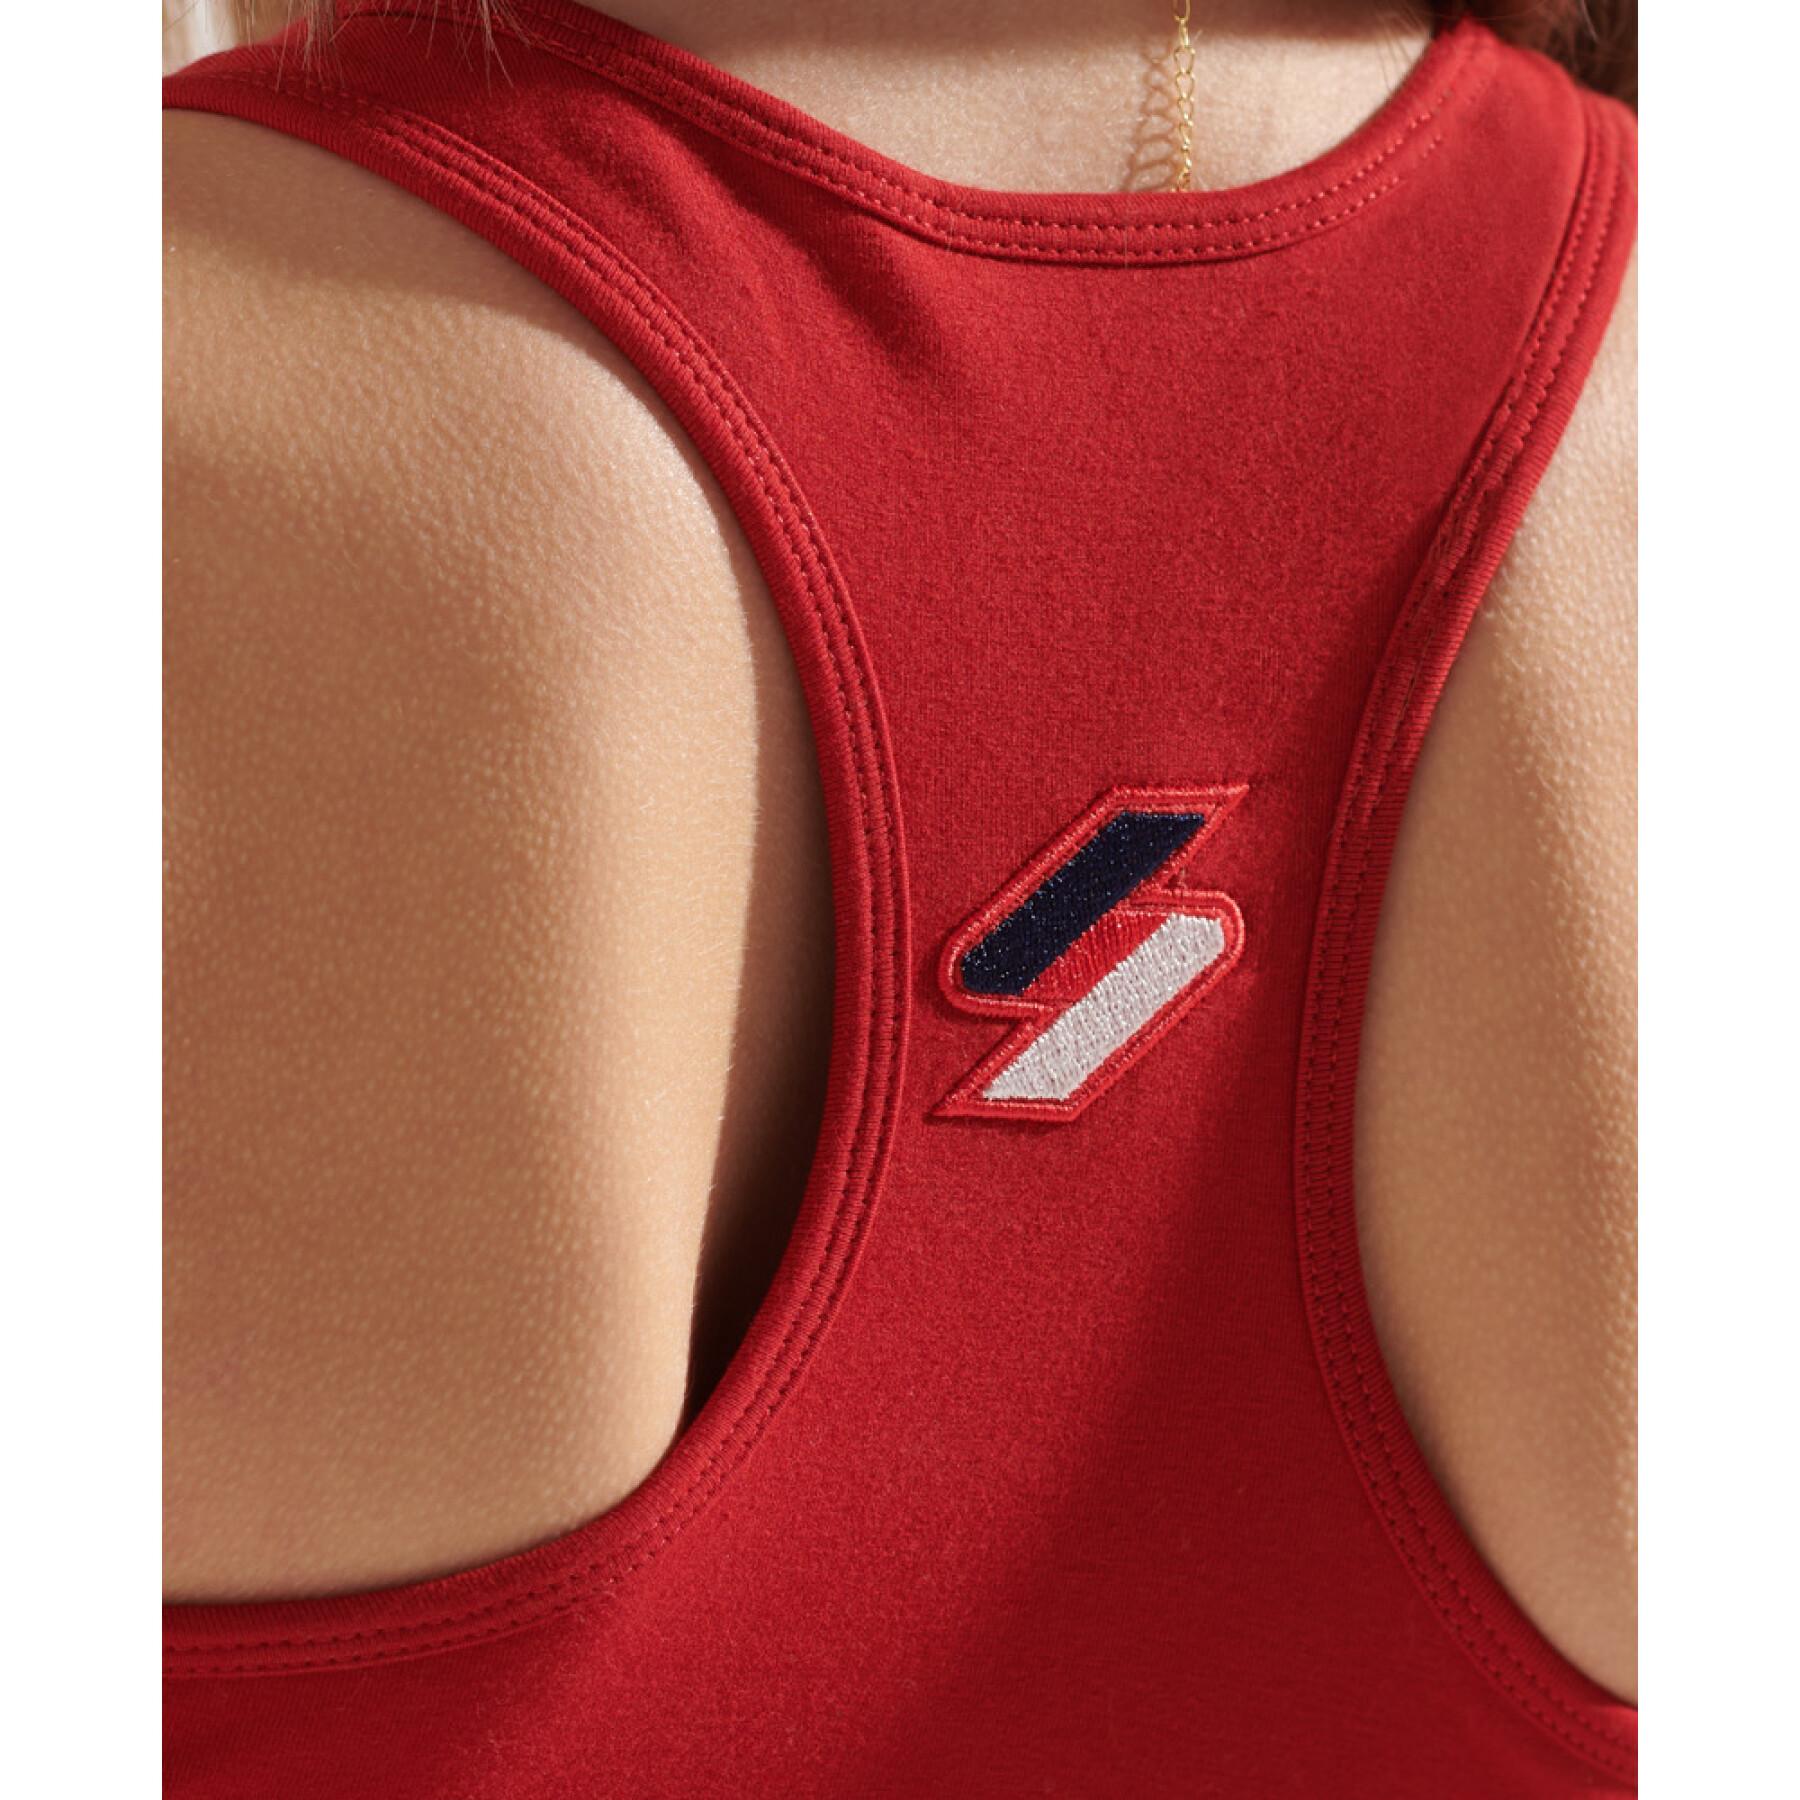 Brassière femme Superdry Sportstyle Essential